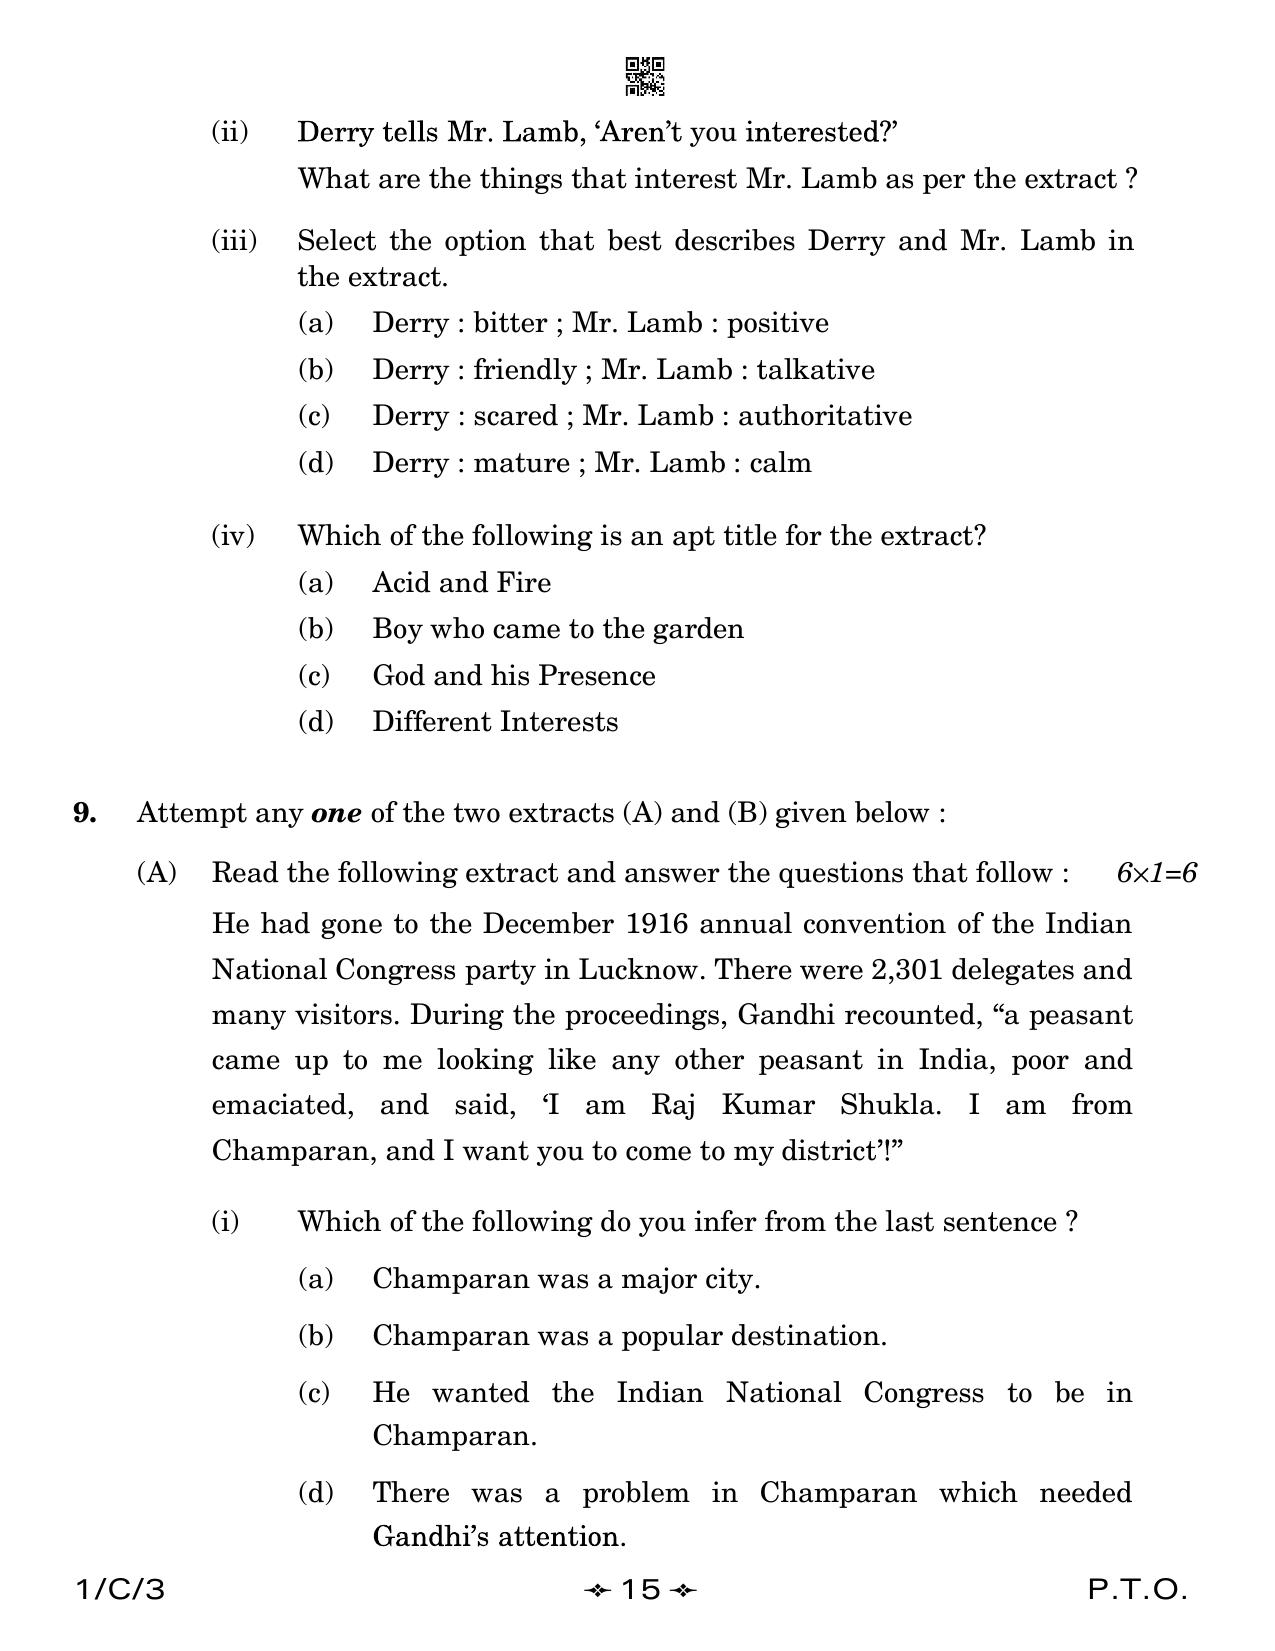 CBSE Class 12 1-3 English Core 2023 (Compartment) Question Paper - Page 15